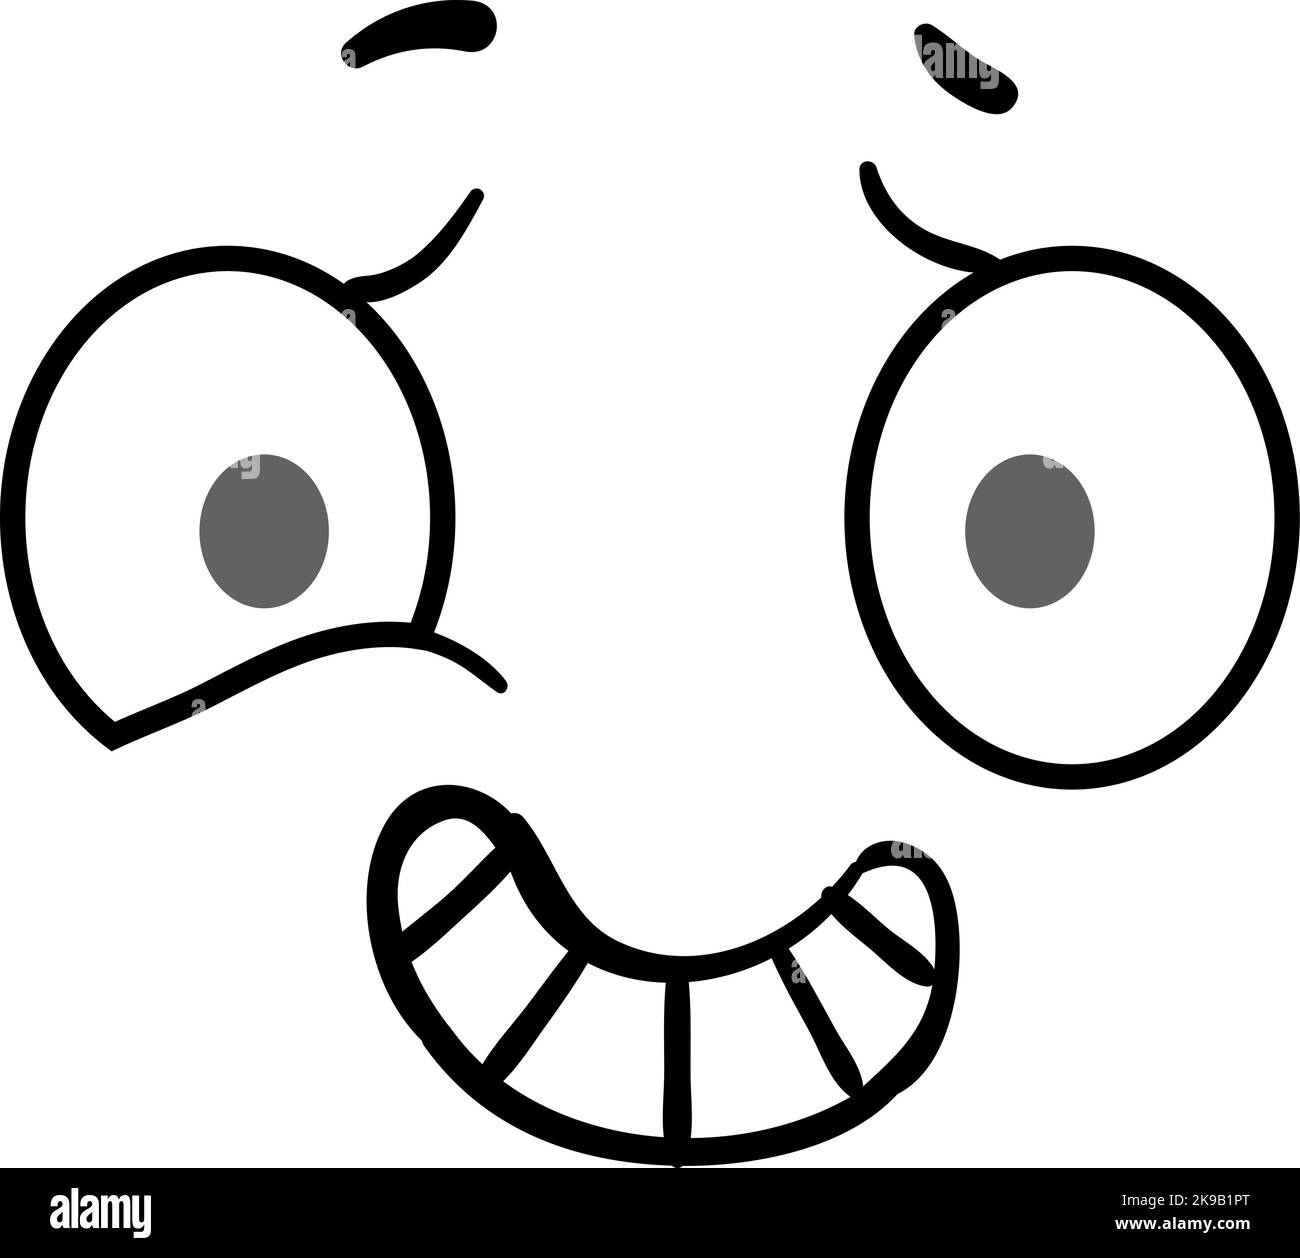 Anxiety cartoon emotion. Stressed face comic expression Stock Vector